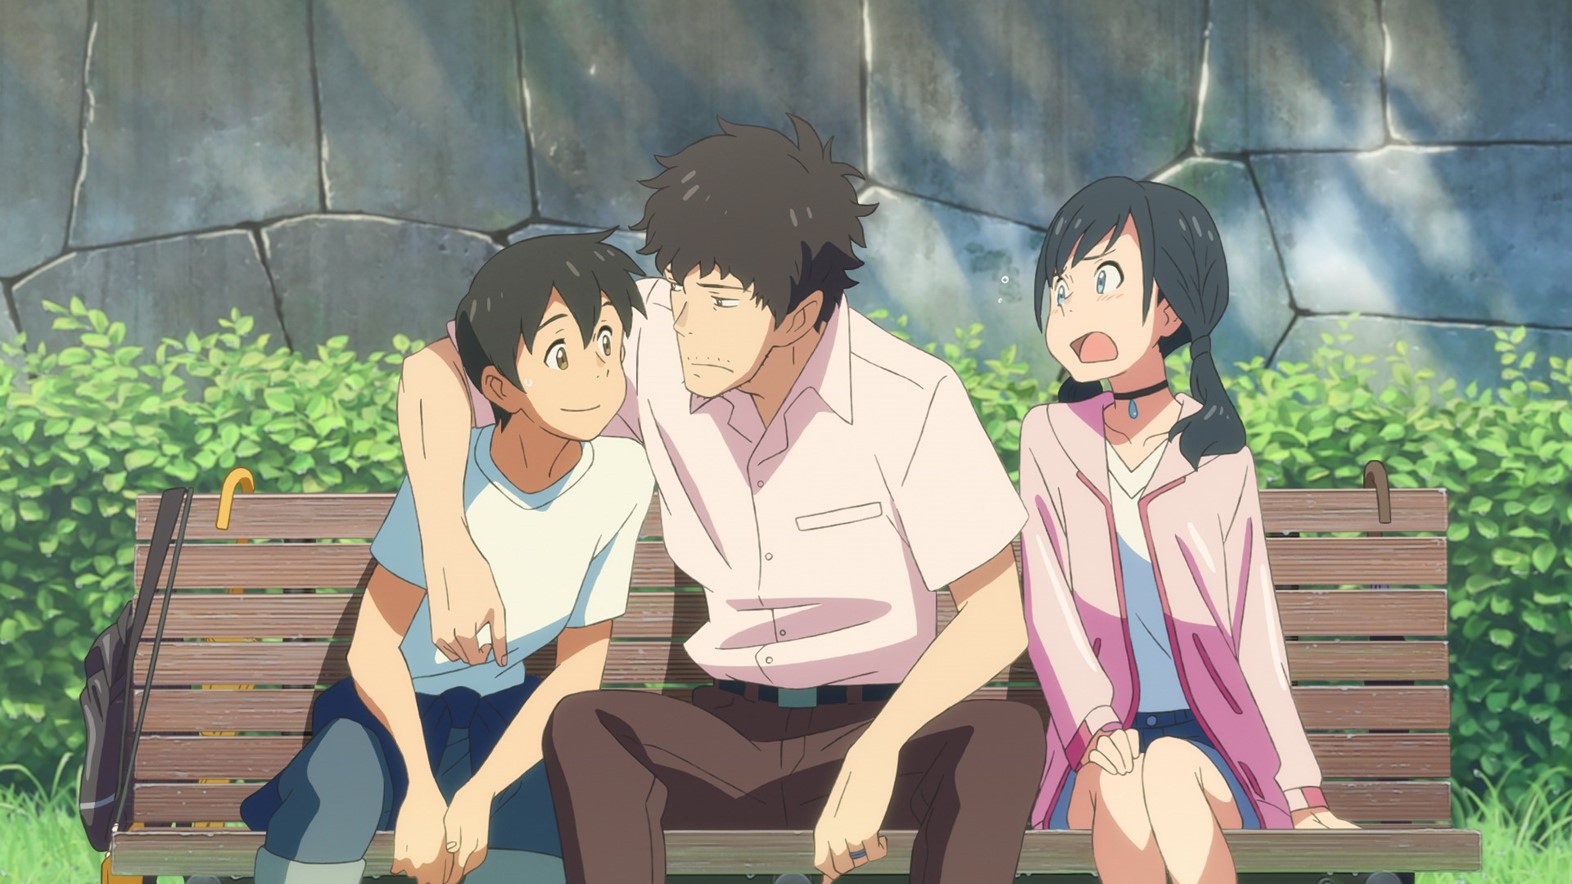 Weathering With You: Emotional climate change-inspired anime comes